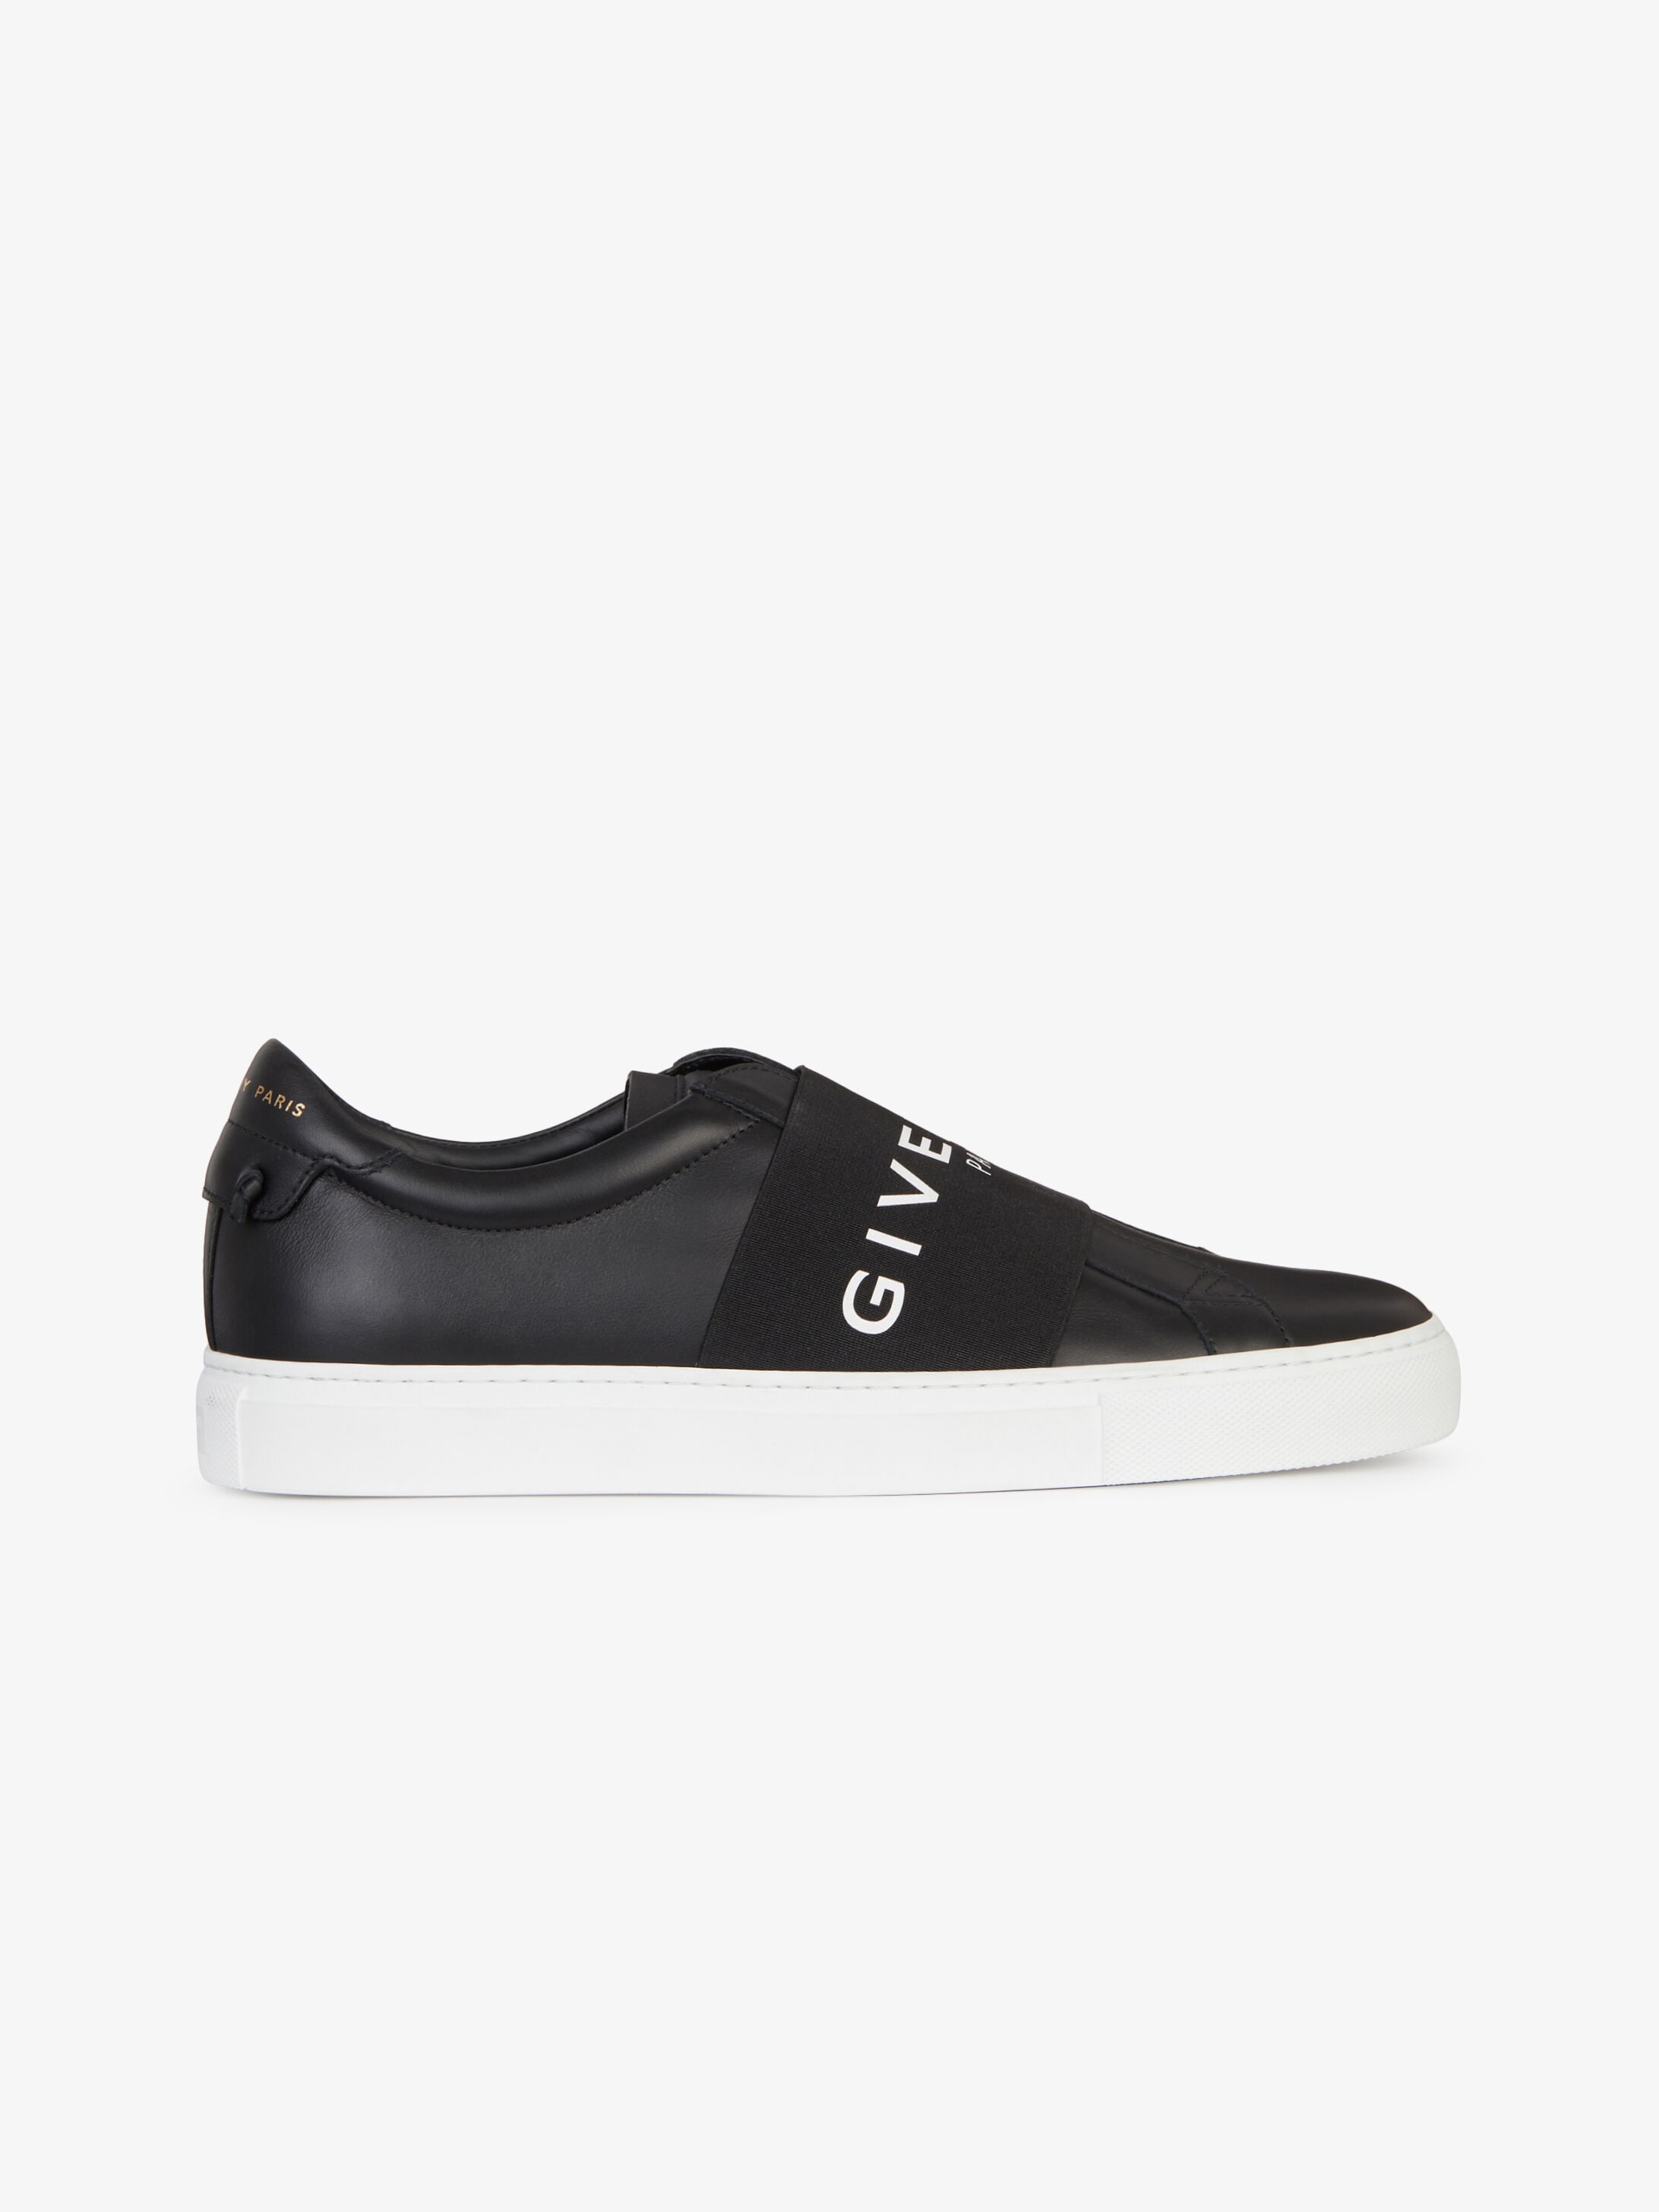 givenchy shoes black